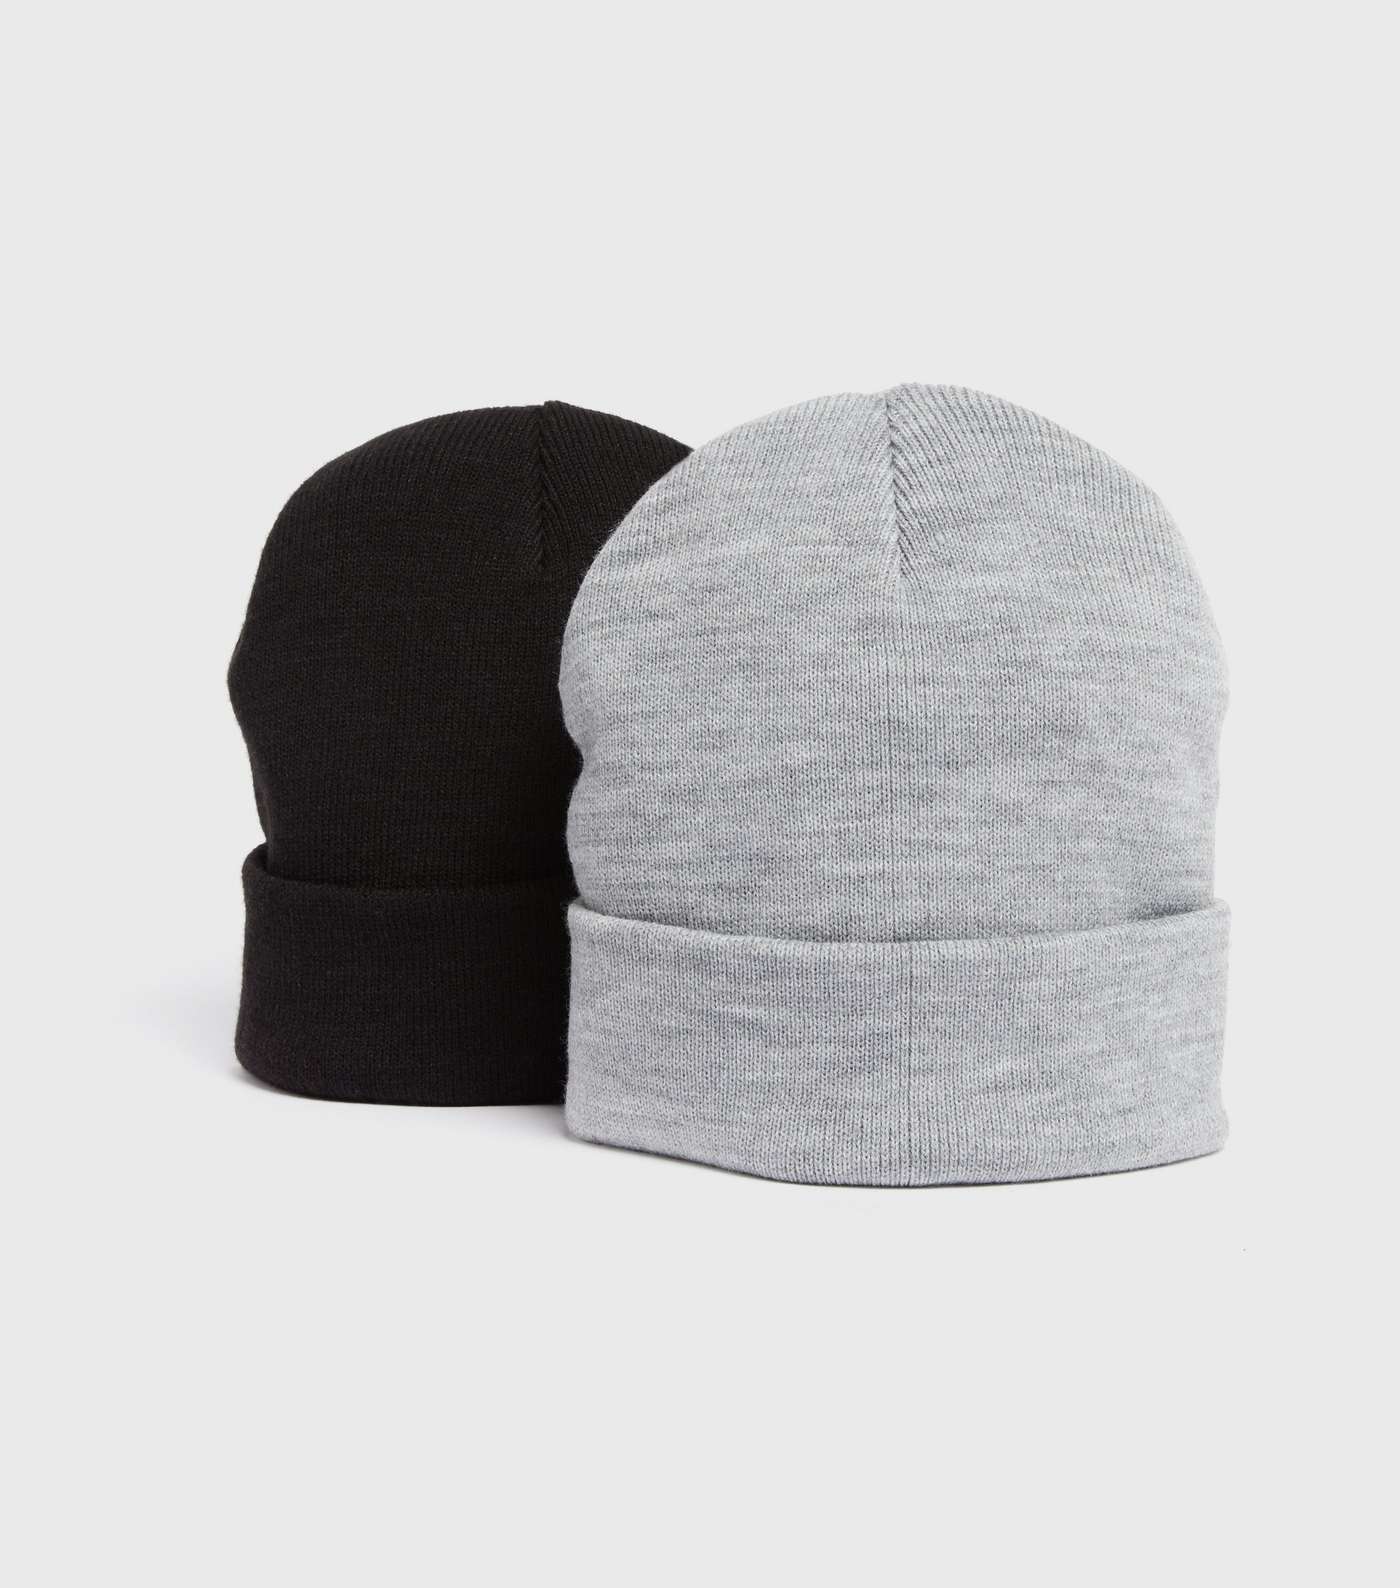 2 Pack Black and Grey Knit Beanies